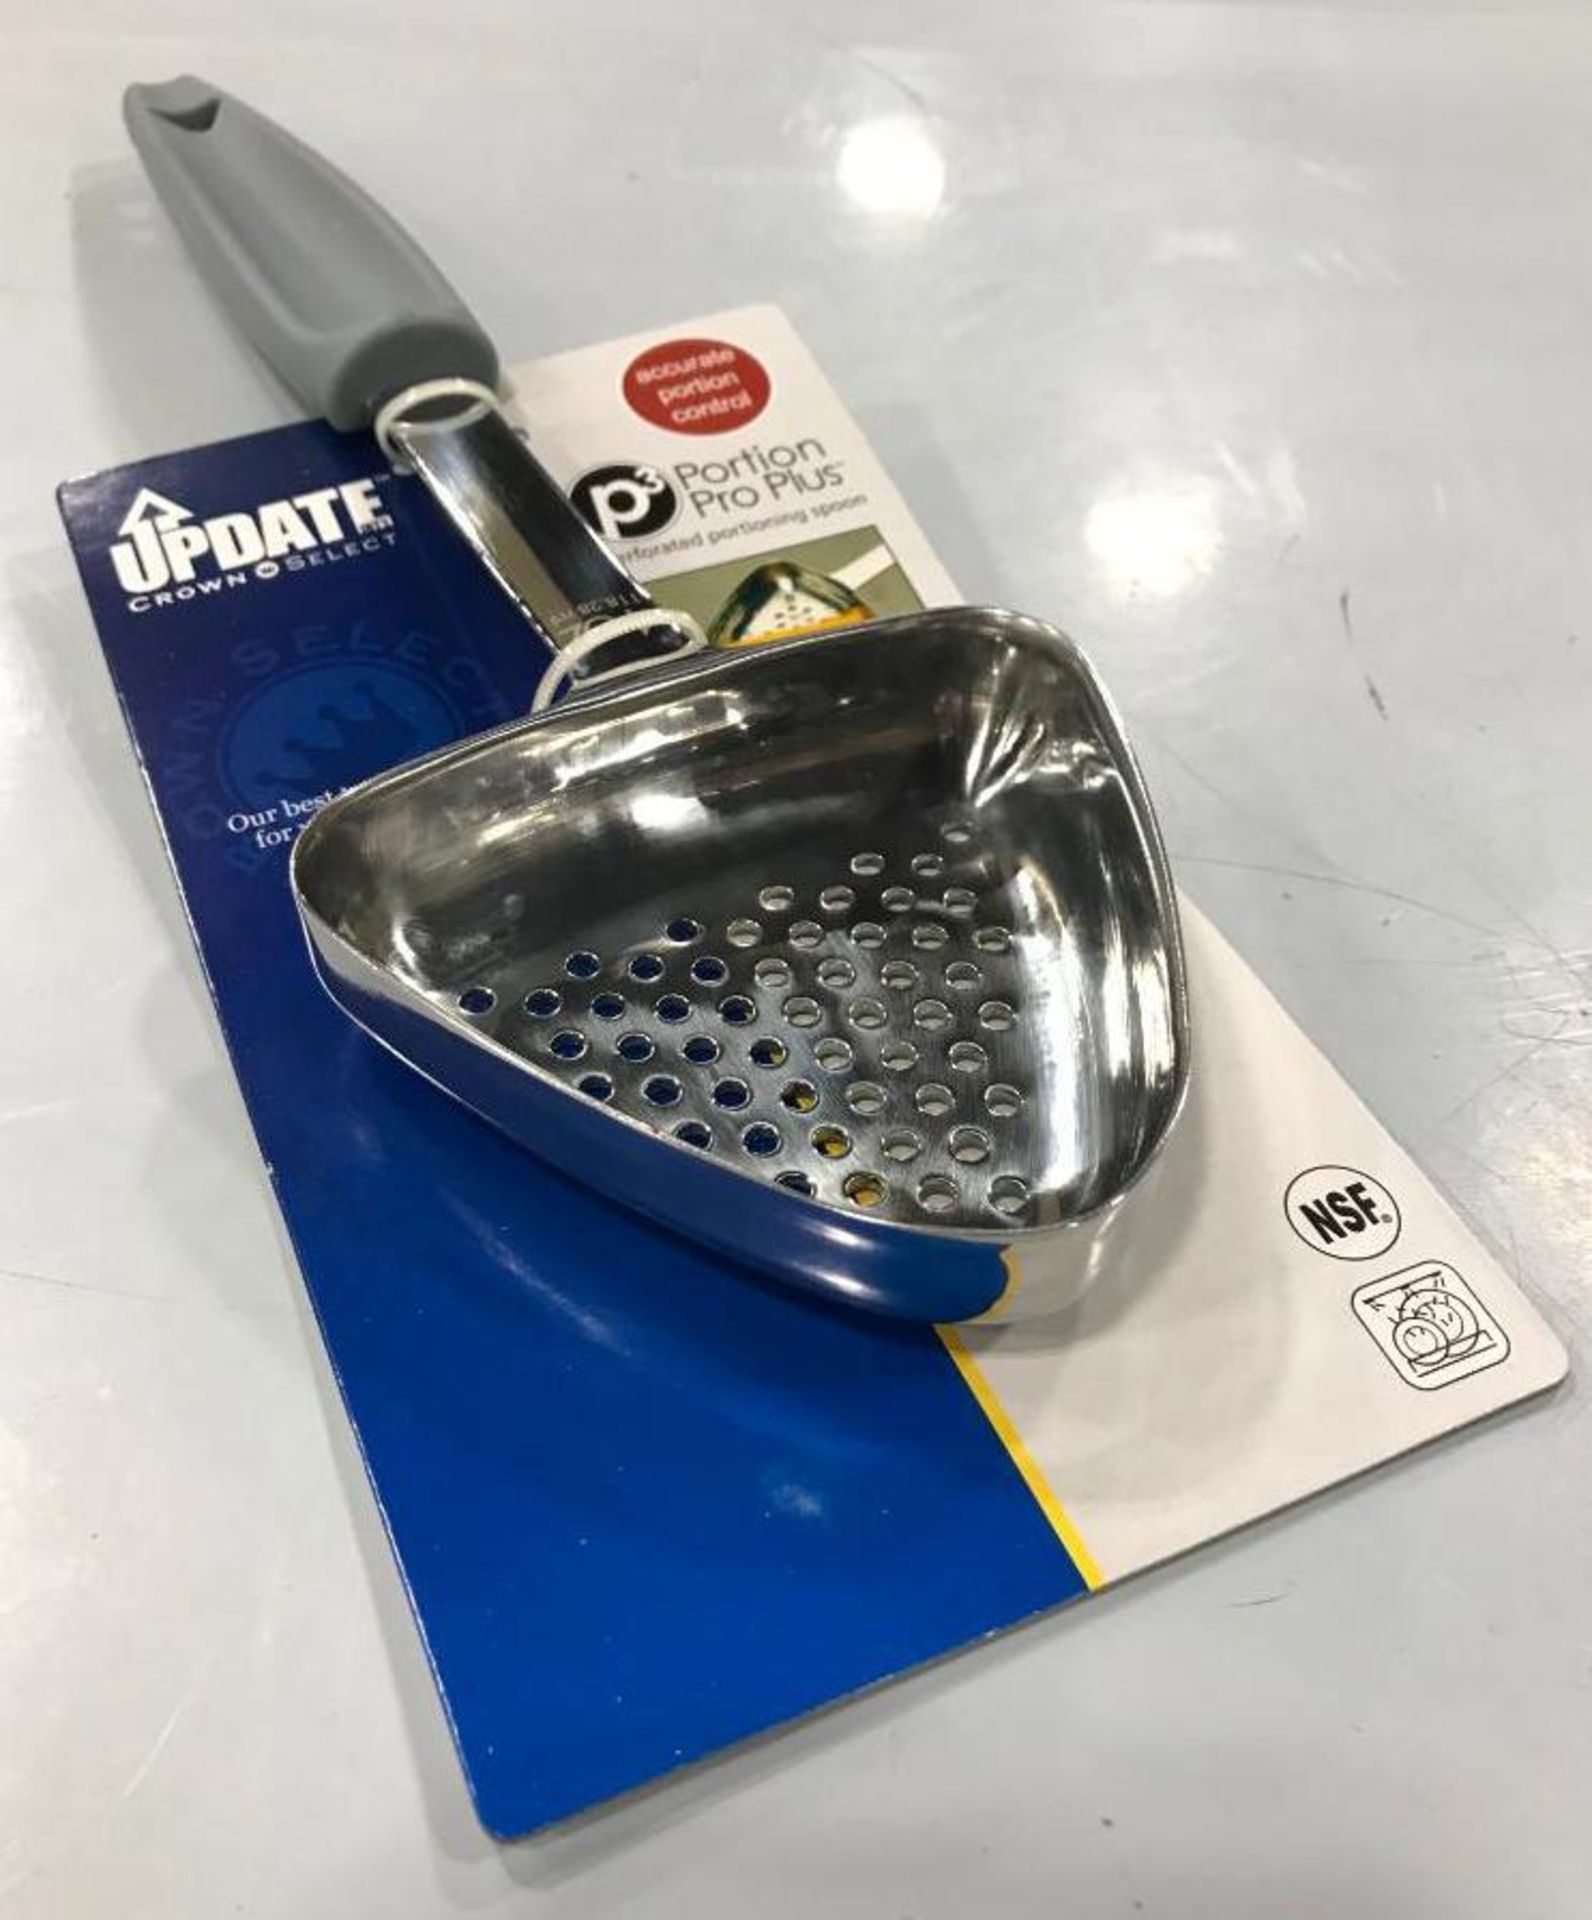 4 0Z PERFORATED PORTIONING SPOON W/ GREY PLASTIC HANDLE - NEW - Image 2 of 2